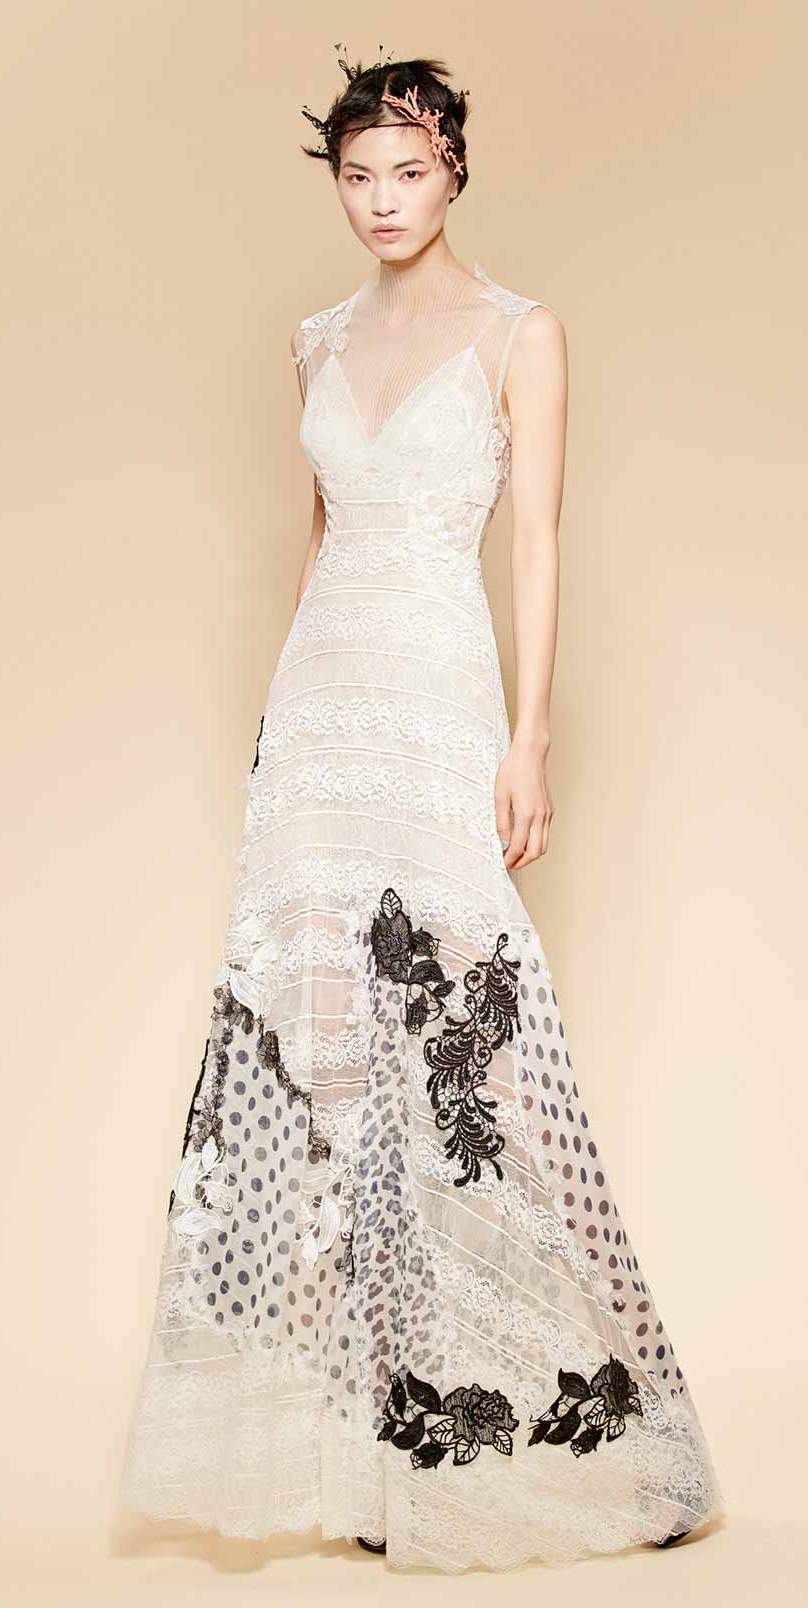 Couture white dress made of striped lace with handmade patchwork skirt made of different black and white printed silks and black silk laces